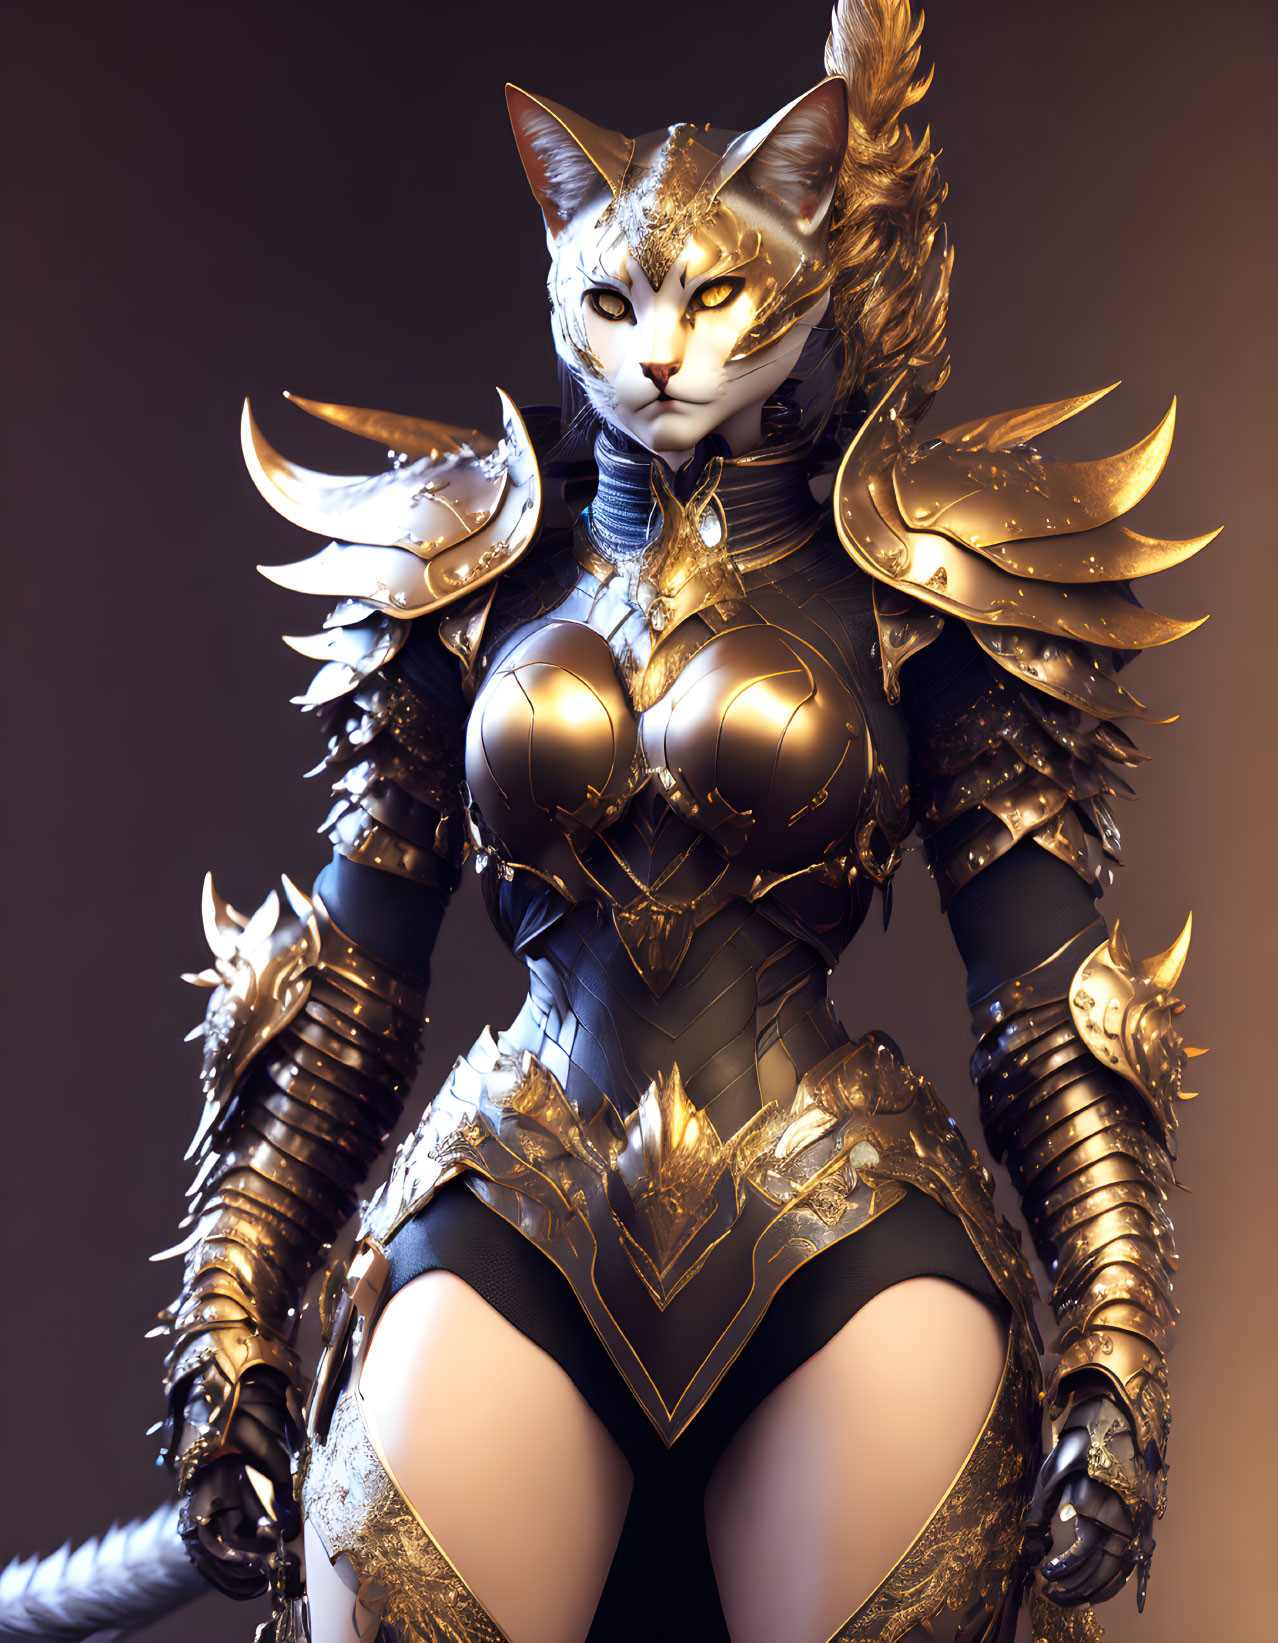 3D humanoid figure with cat head in gold and black armor on neutral background